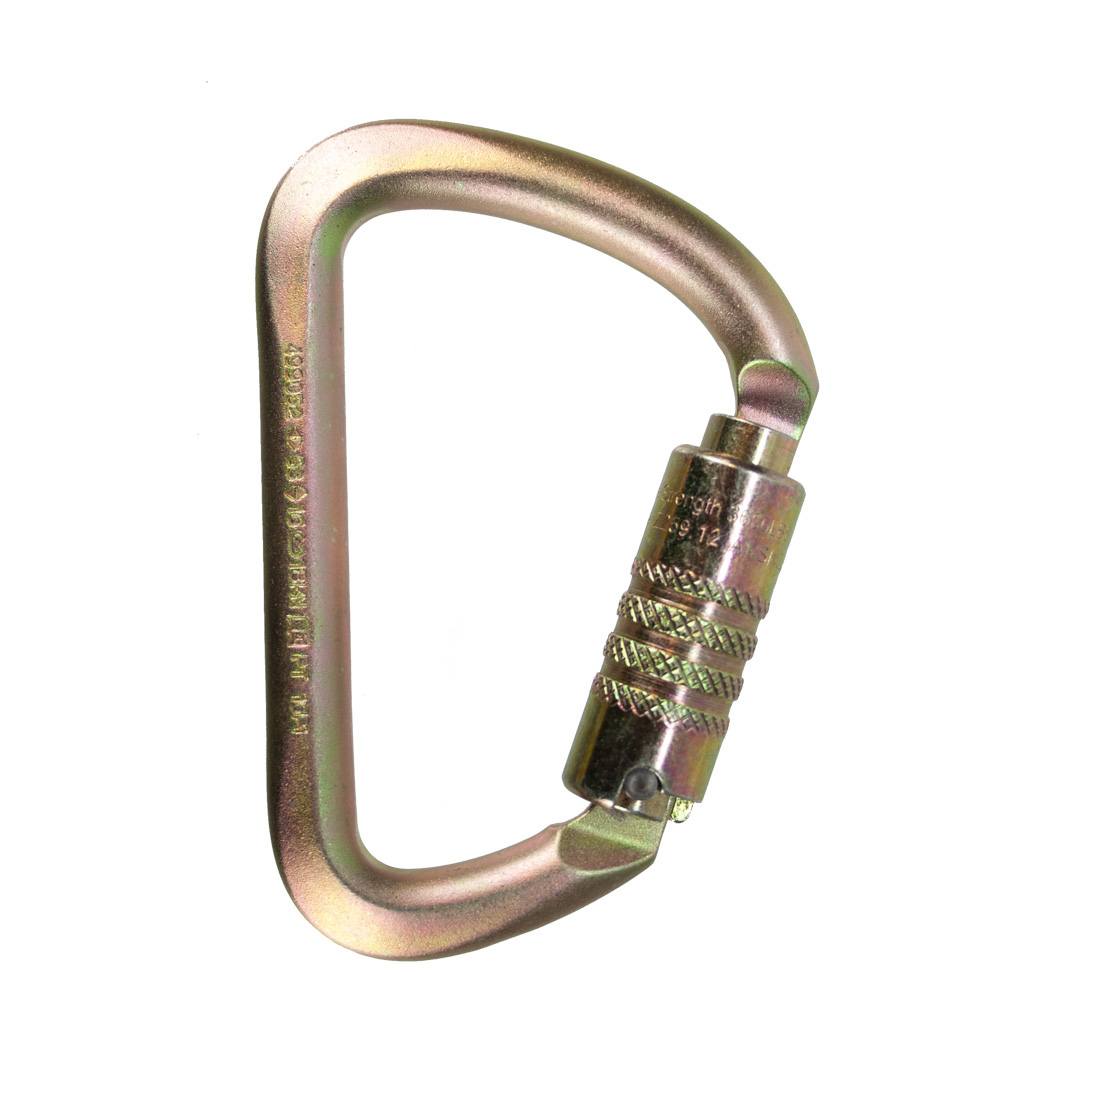 Liberty Mountain ANSI D Carabiner Twist Lock - Large - Right Side View